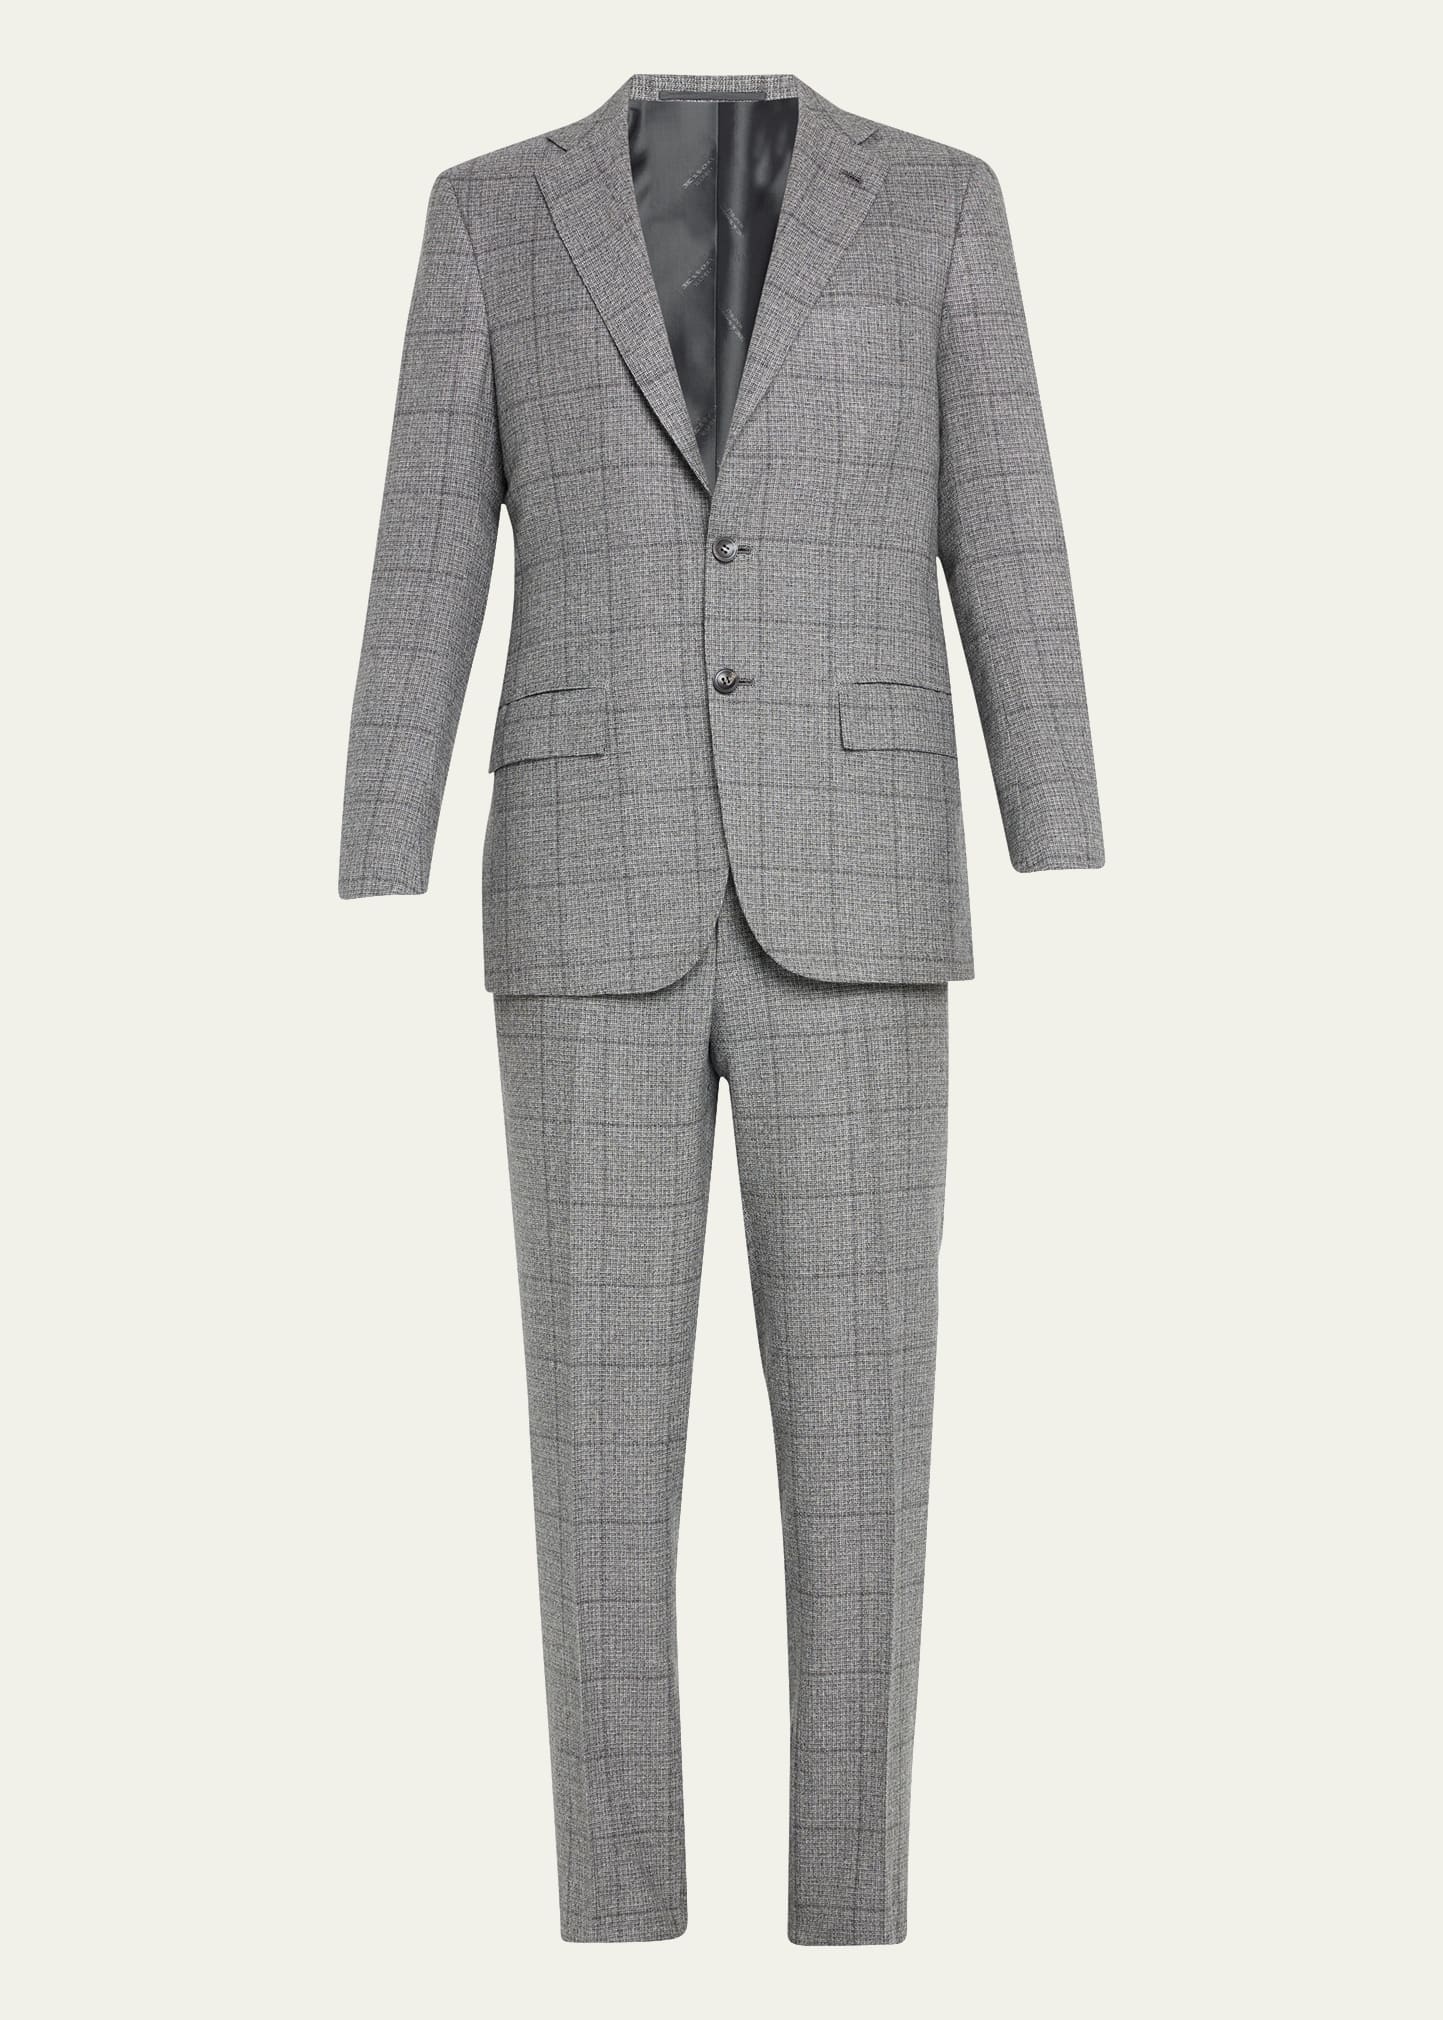 Kiton Men's Windowpane Cashmere Suit In Gry